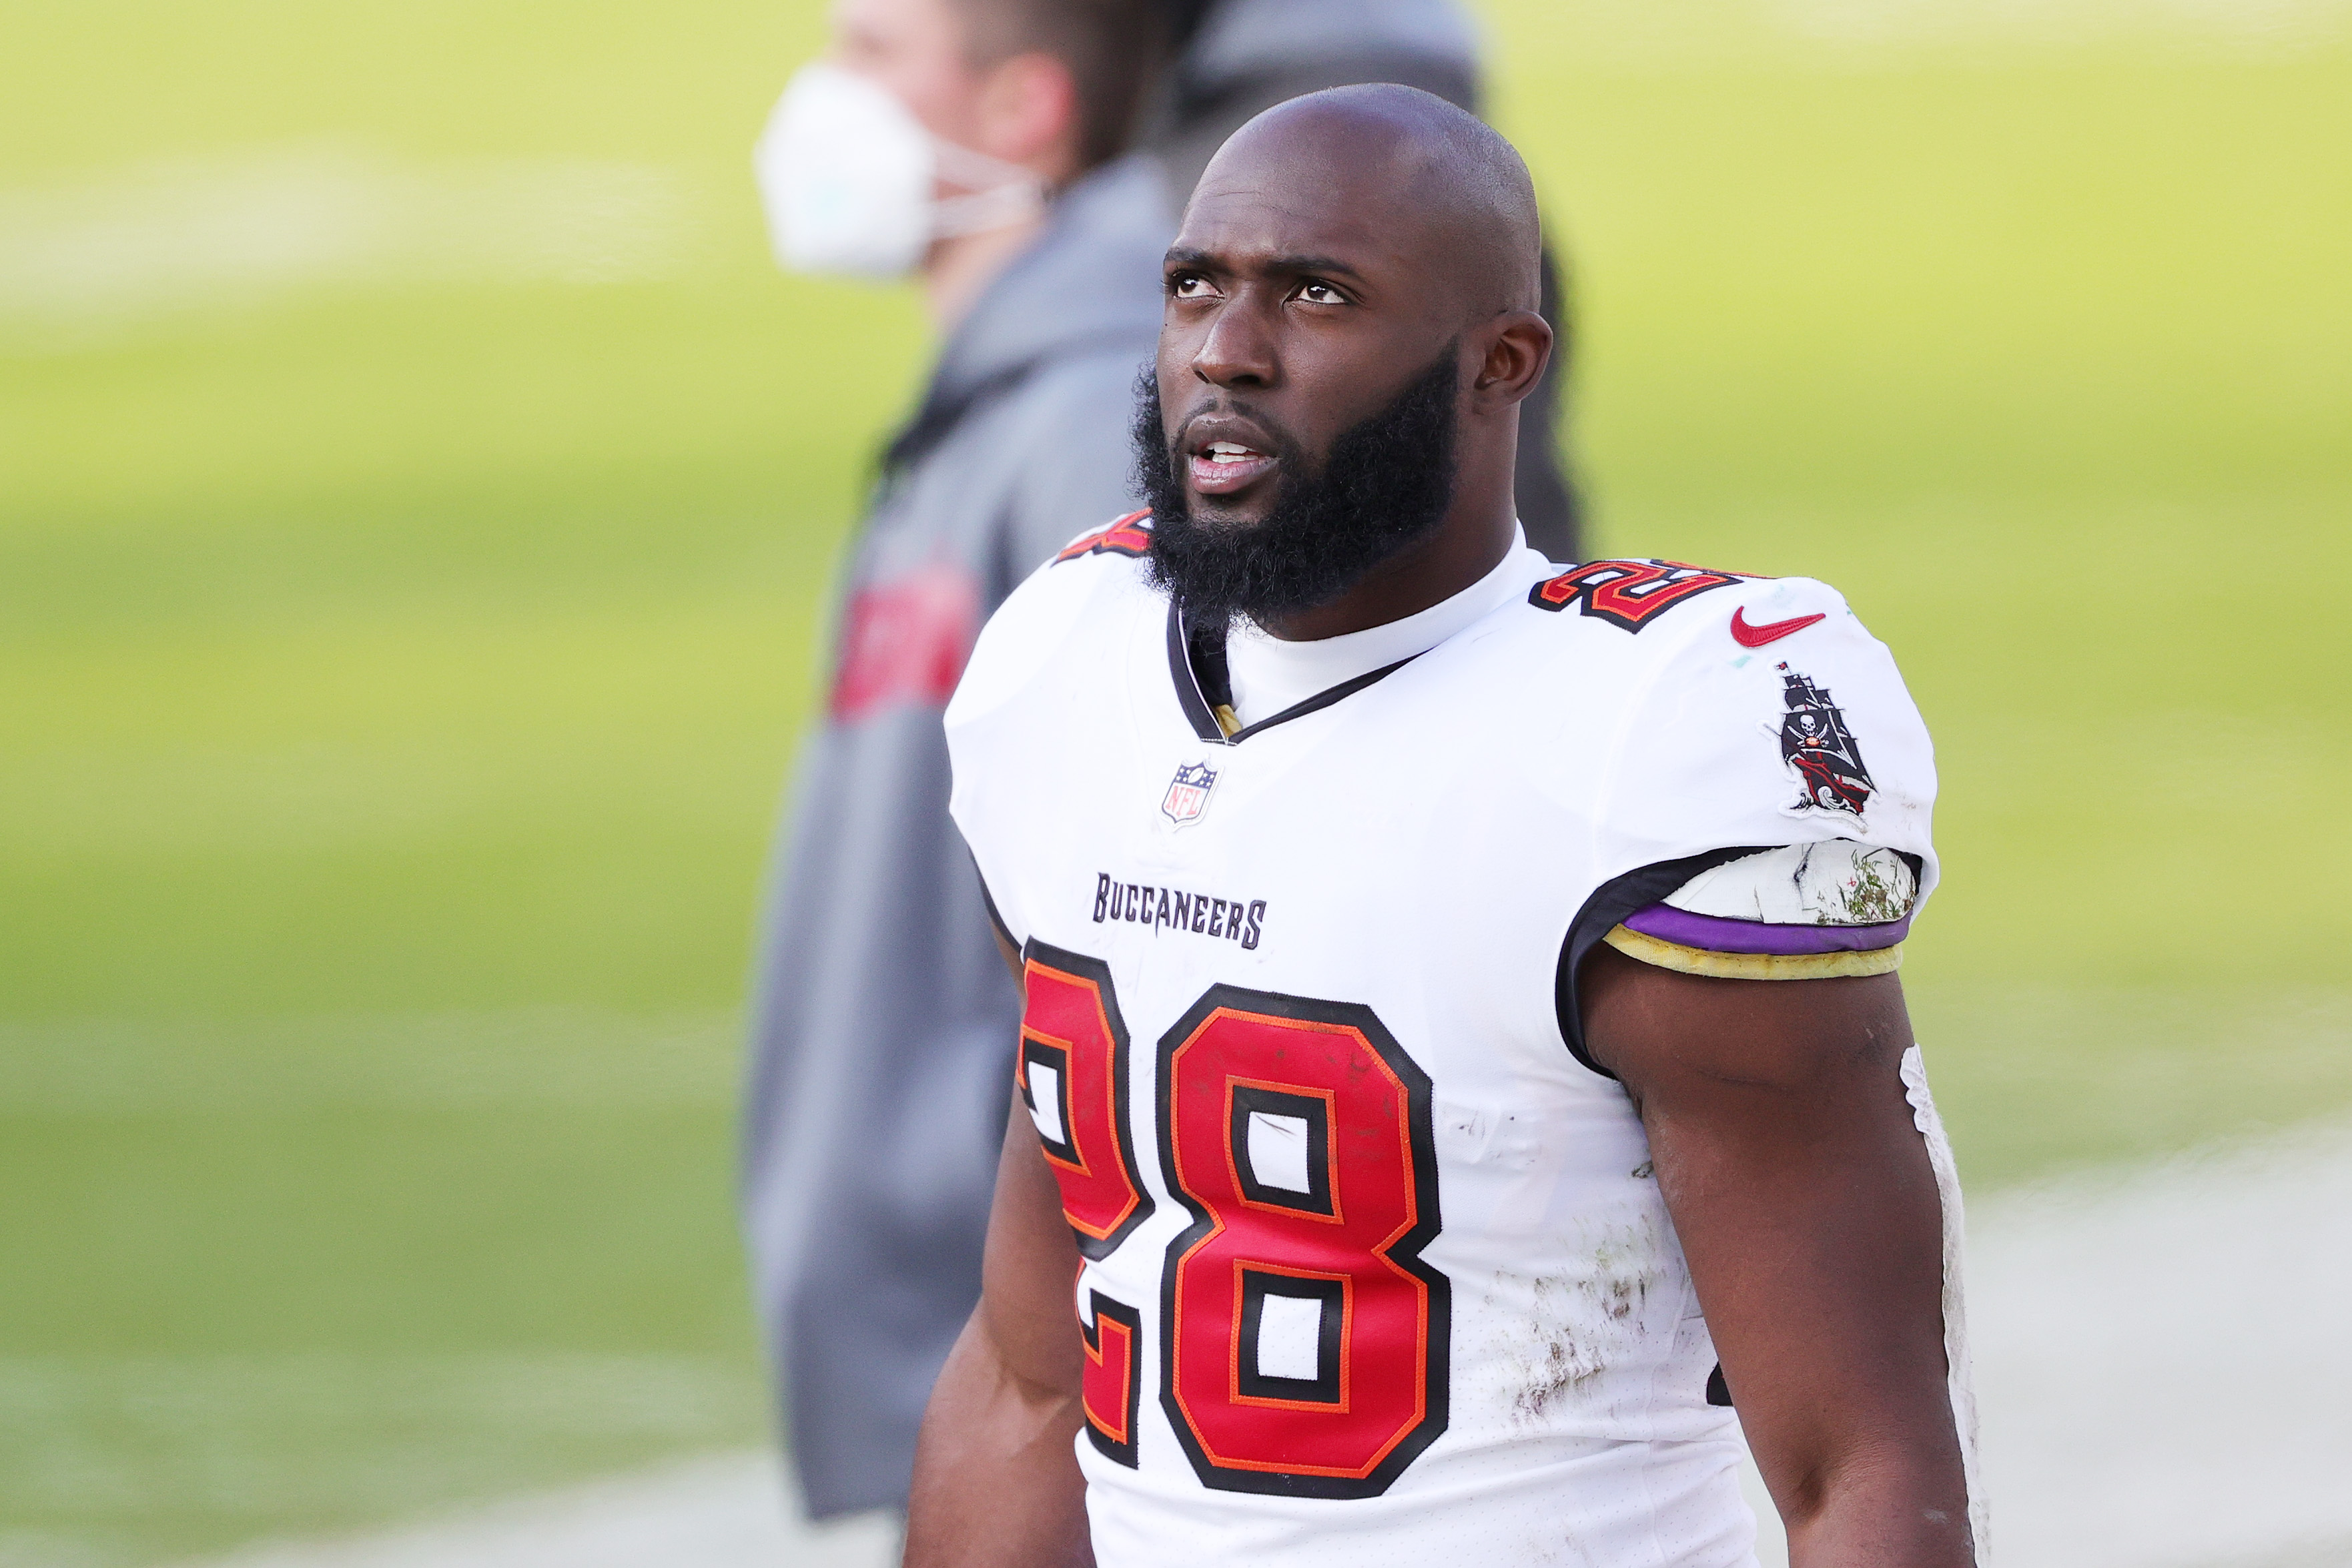 Leonard Fournette of the Tampa Bay Buccaneers looks on from the sideline